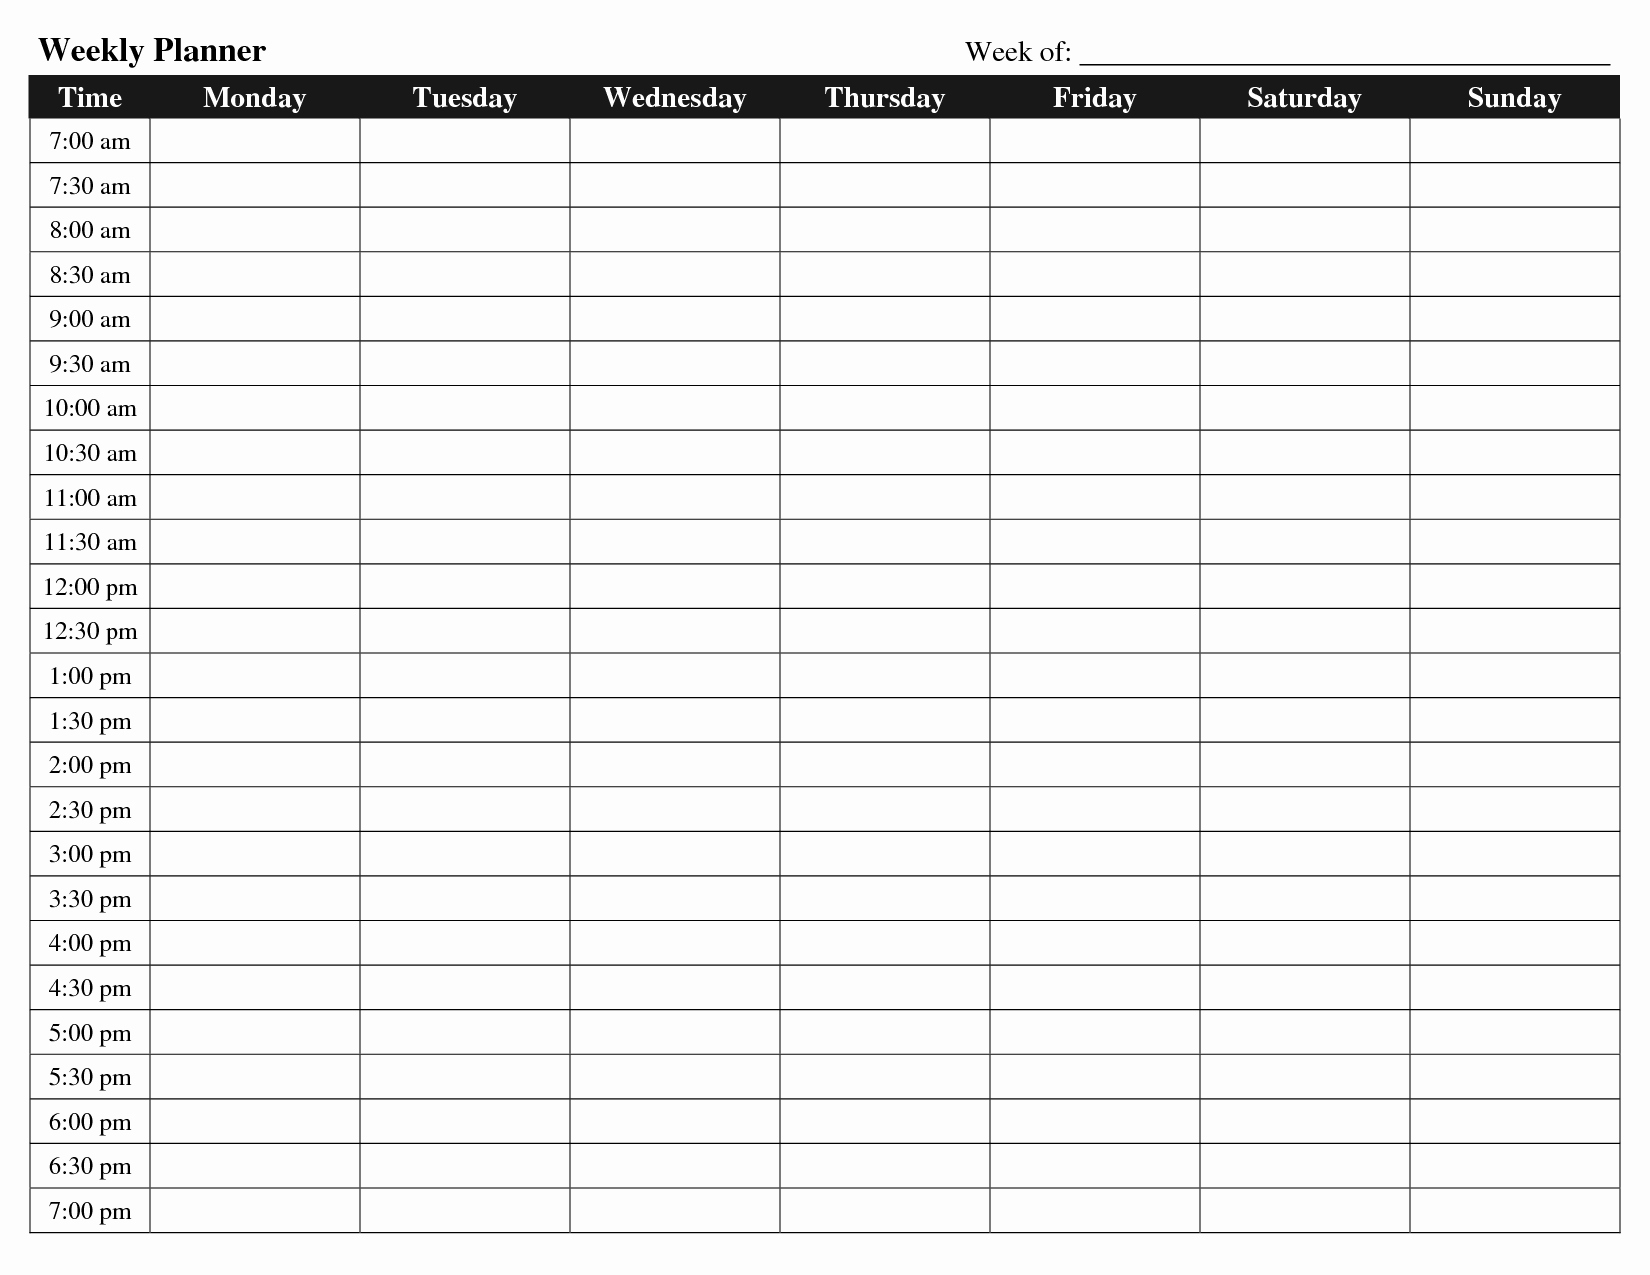 Weekly Schedule Template Ideas Calendar With Time Slots Free | Smorad within Weekly Schedule With Time Slots